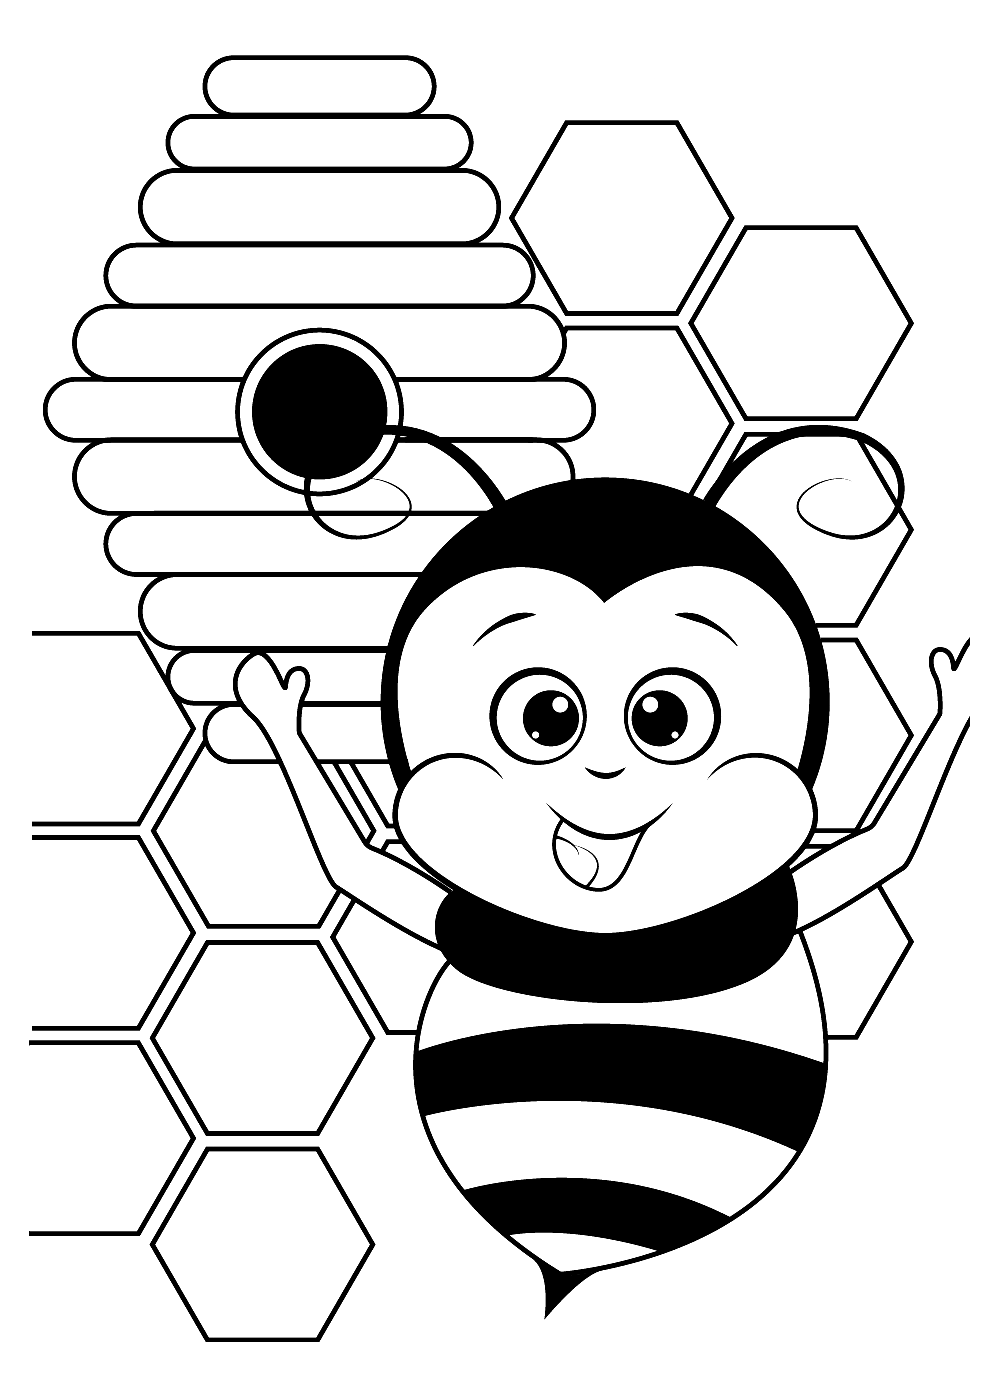 Worker Bee with Glitter Eyes Coloring Pages